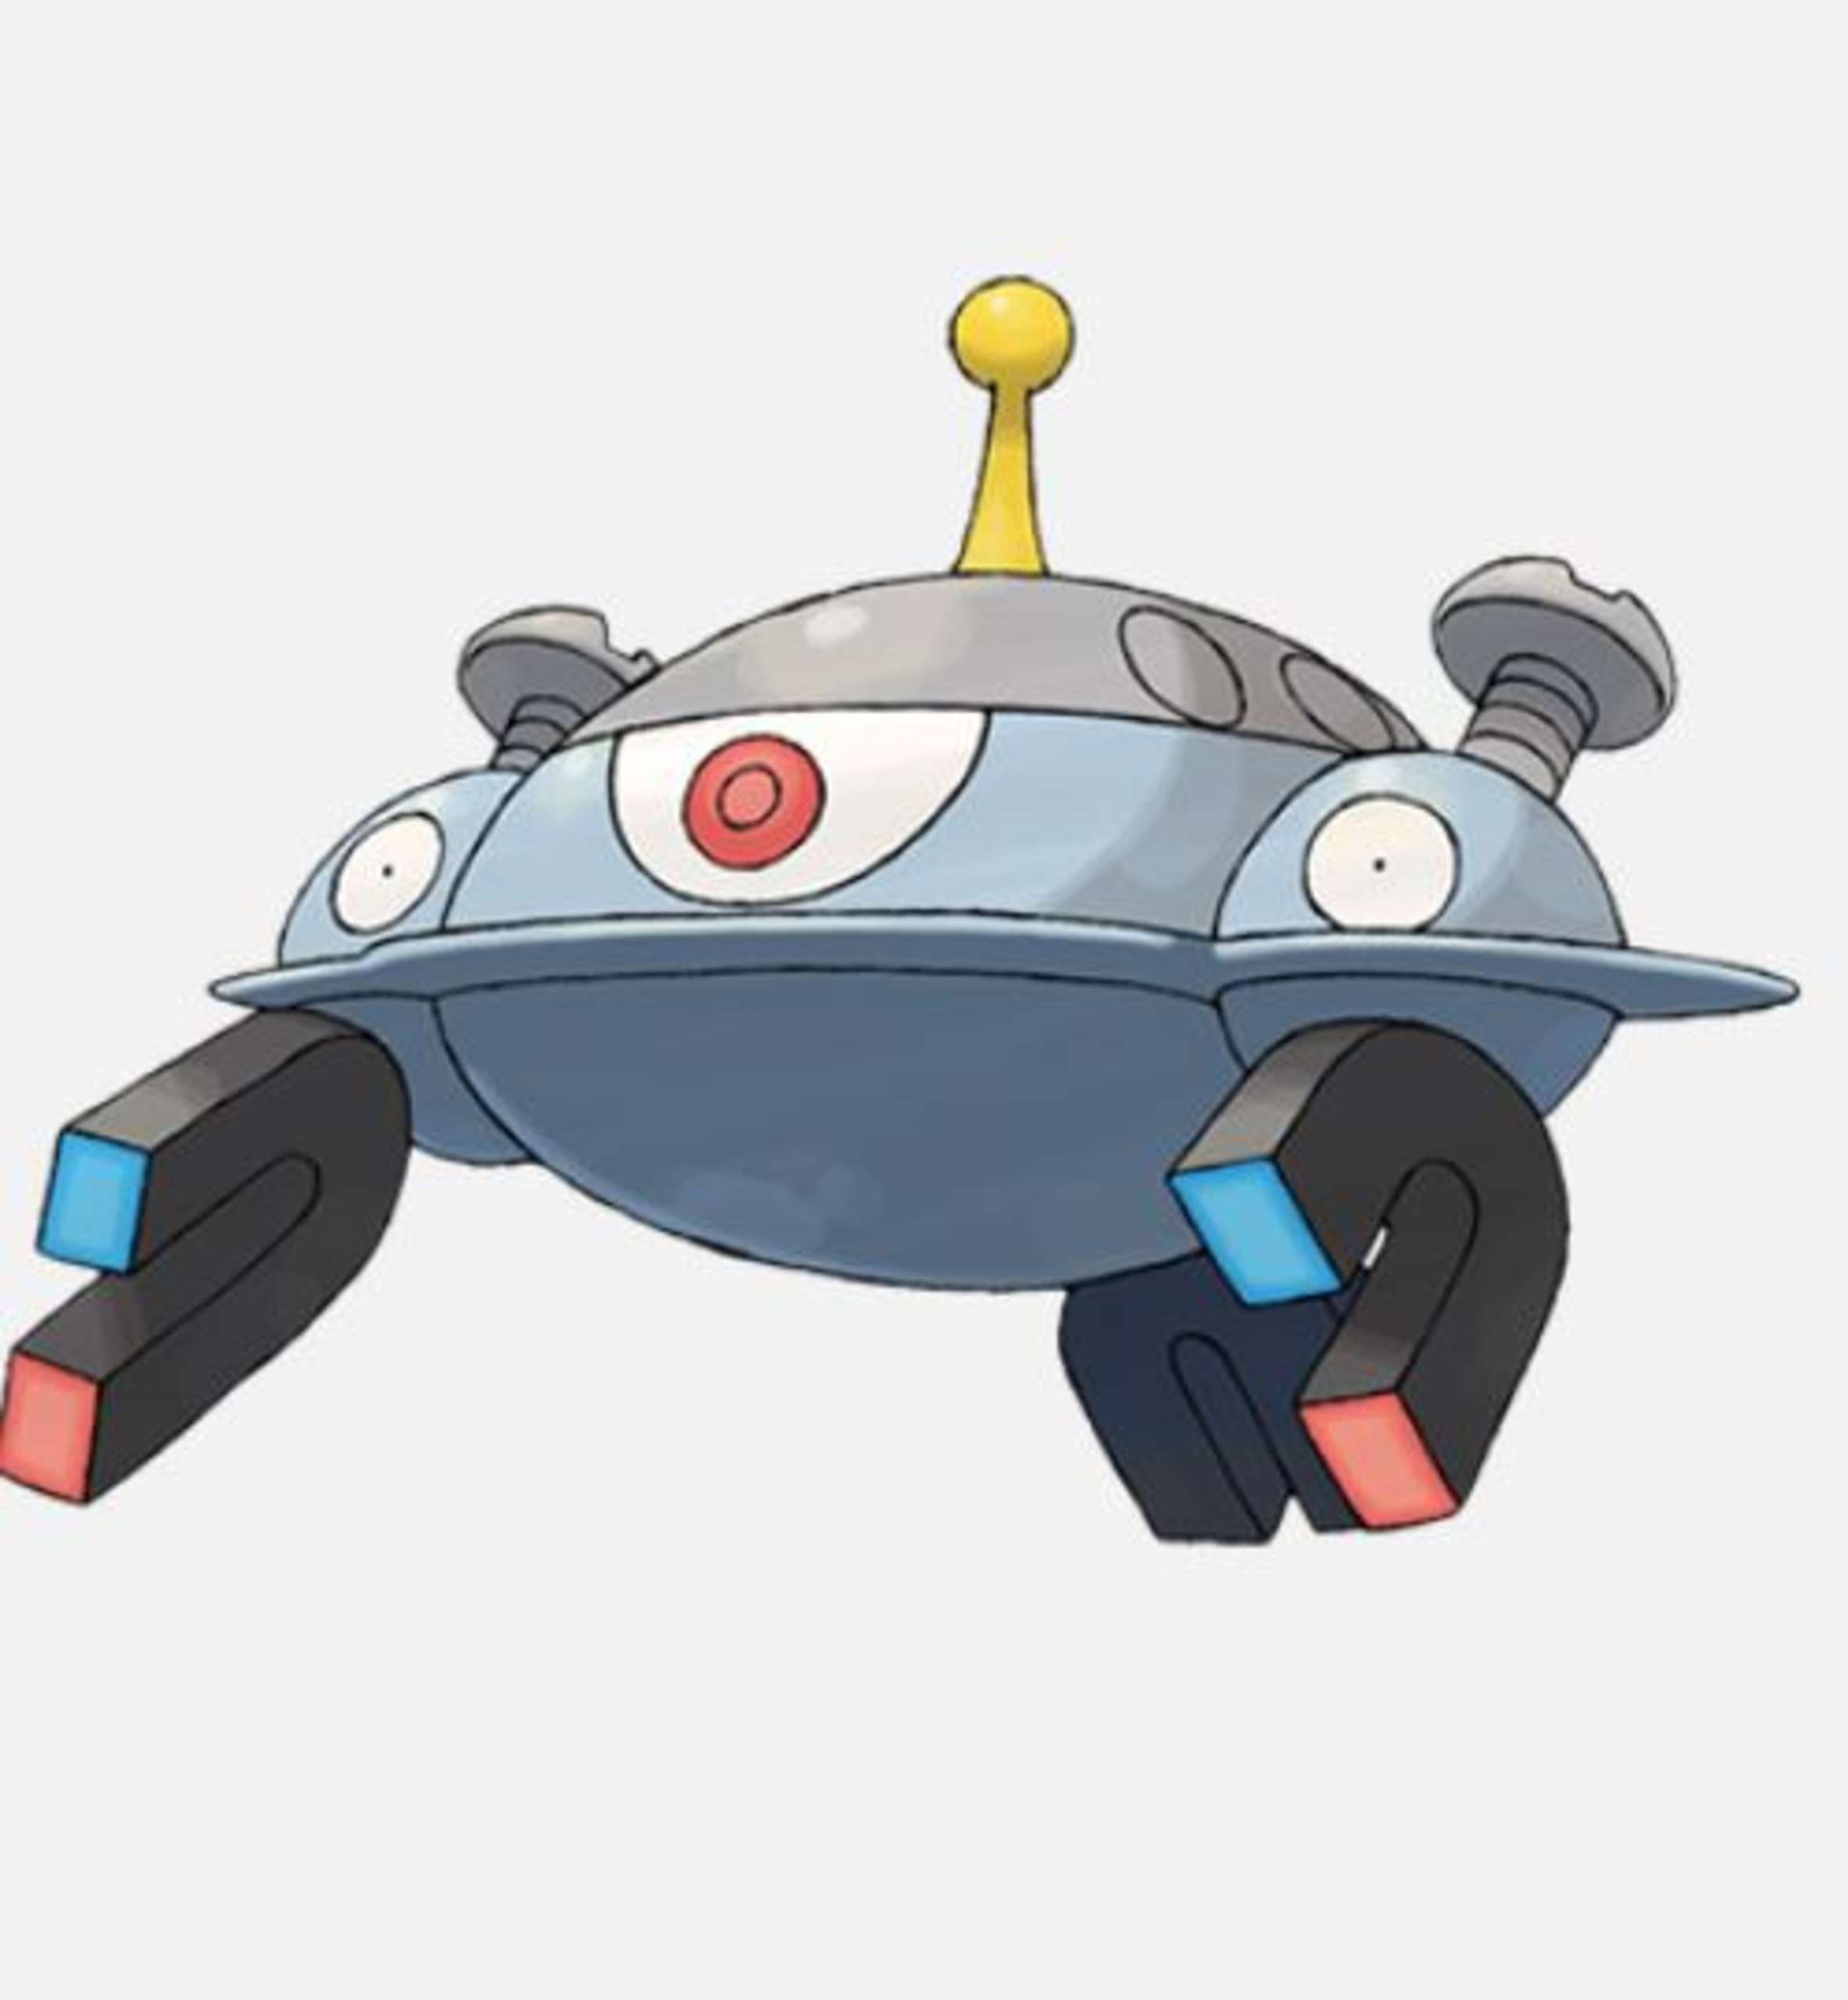 A Pokémon Fan Has Crafted A Remarkable Model Of The Metallic Pokémon Magnezone That Floats In The Air Thanks To Magnets And Engineering